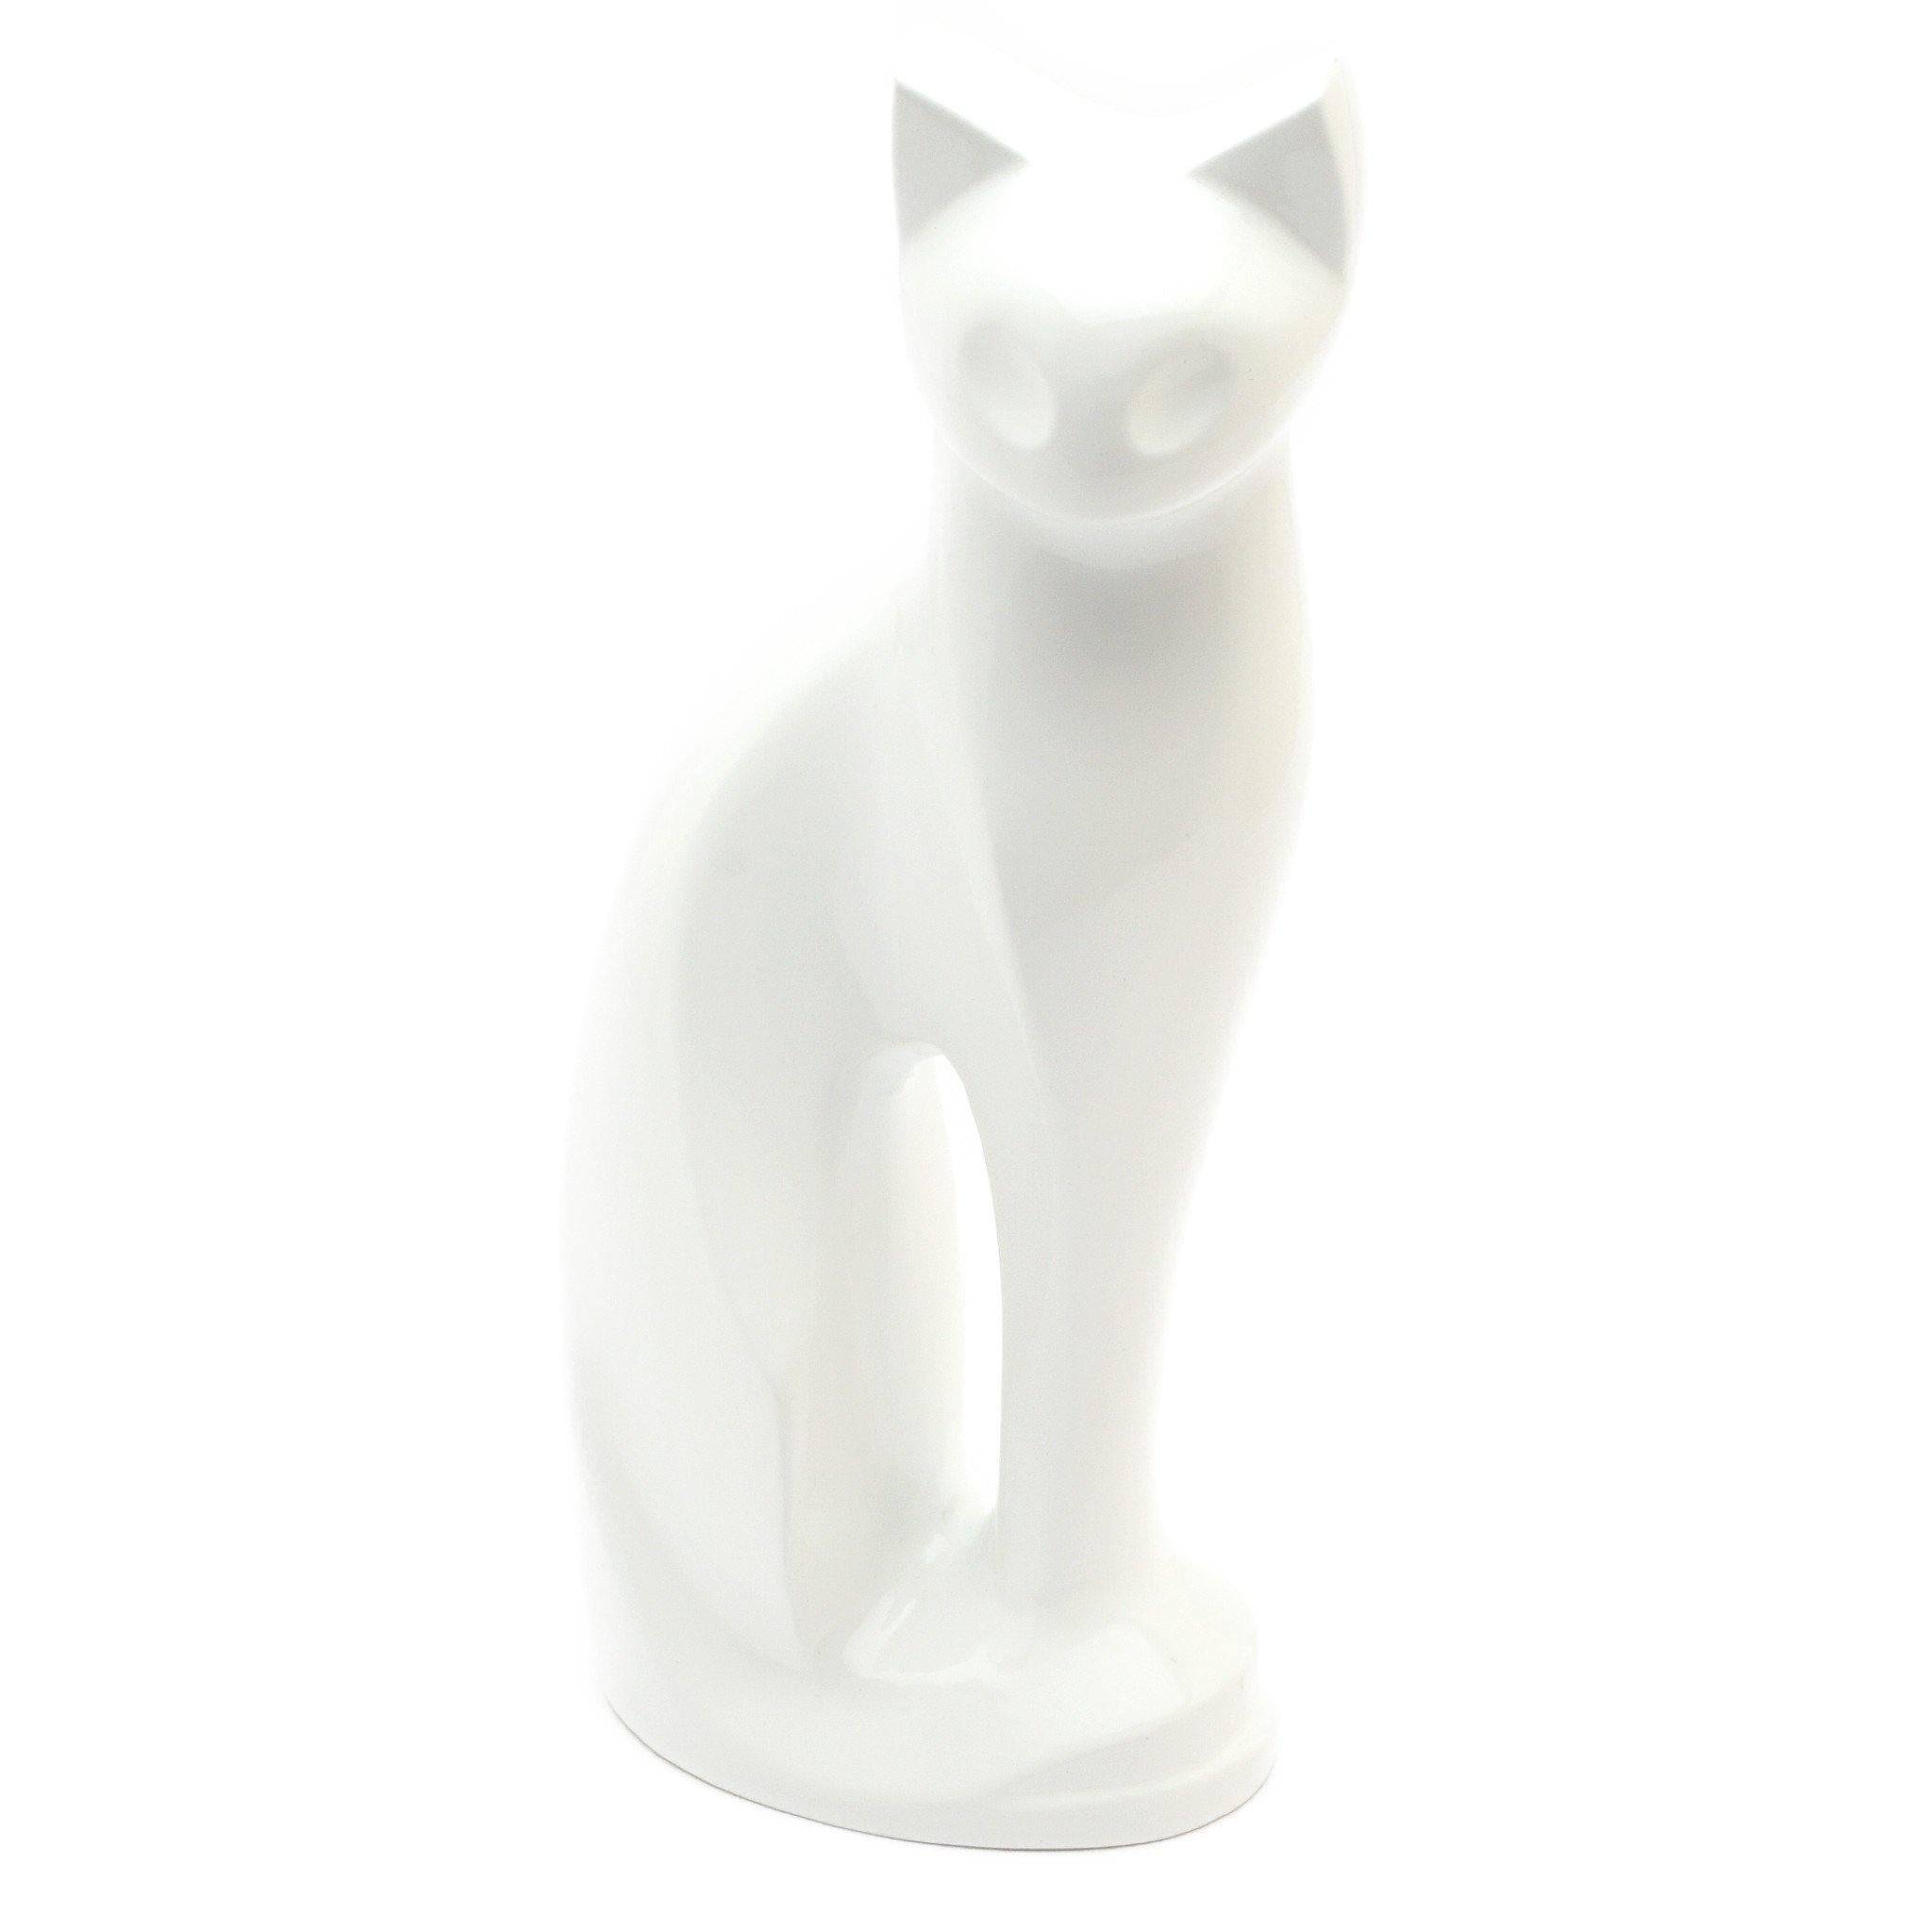 Figurine Cremation Ashes Cat Urn RC